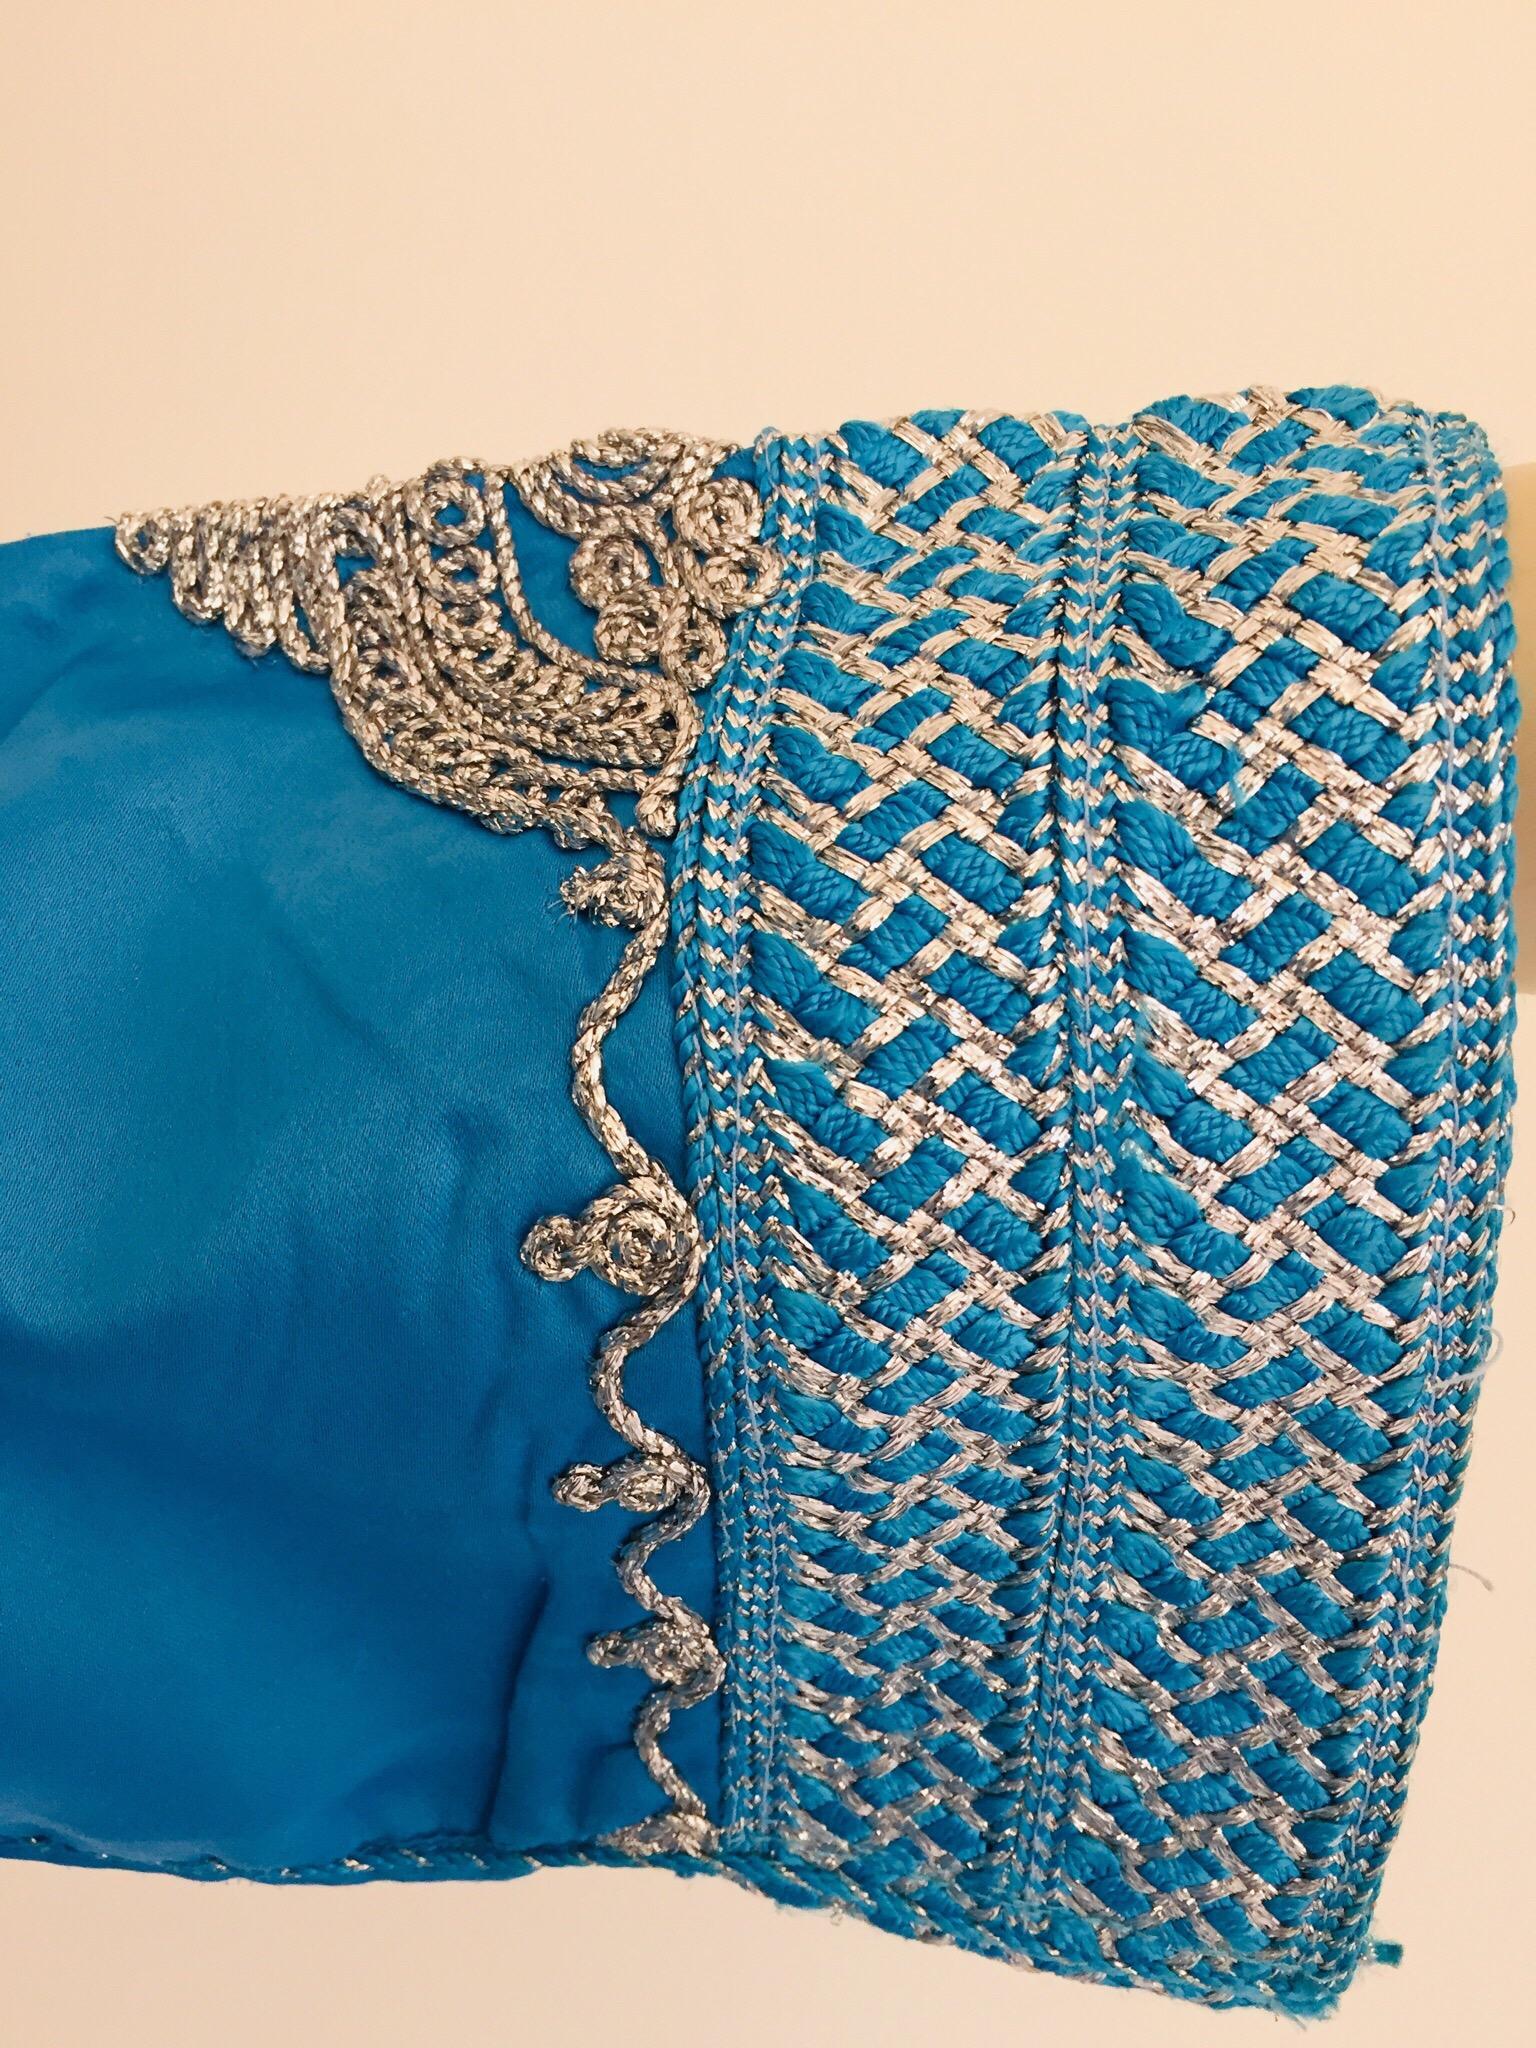 Hand-Crafted Moroccan Kaftan in Turquoise Blue and Silver For Sale